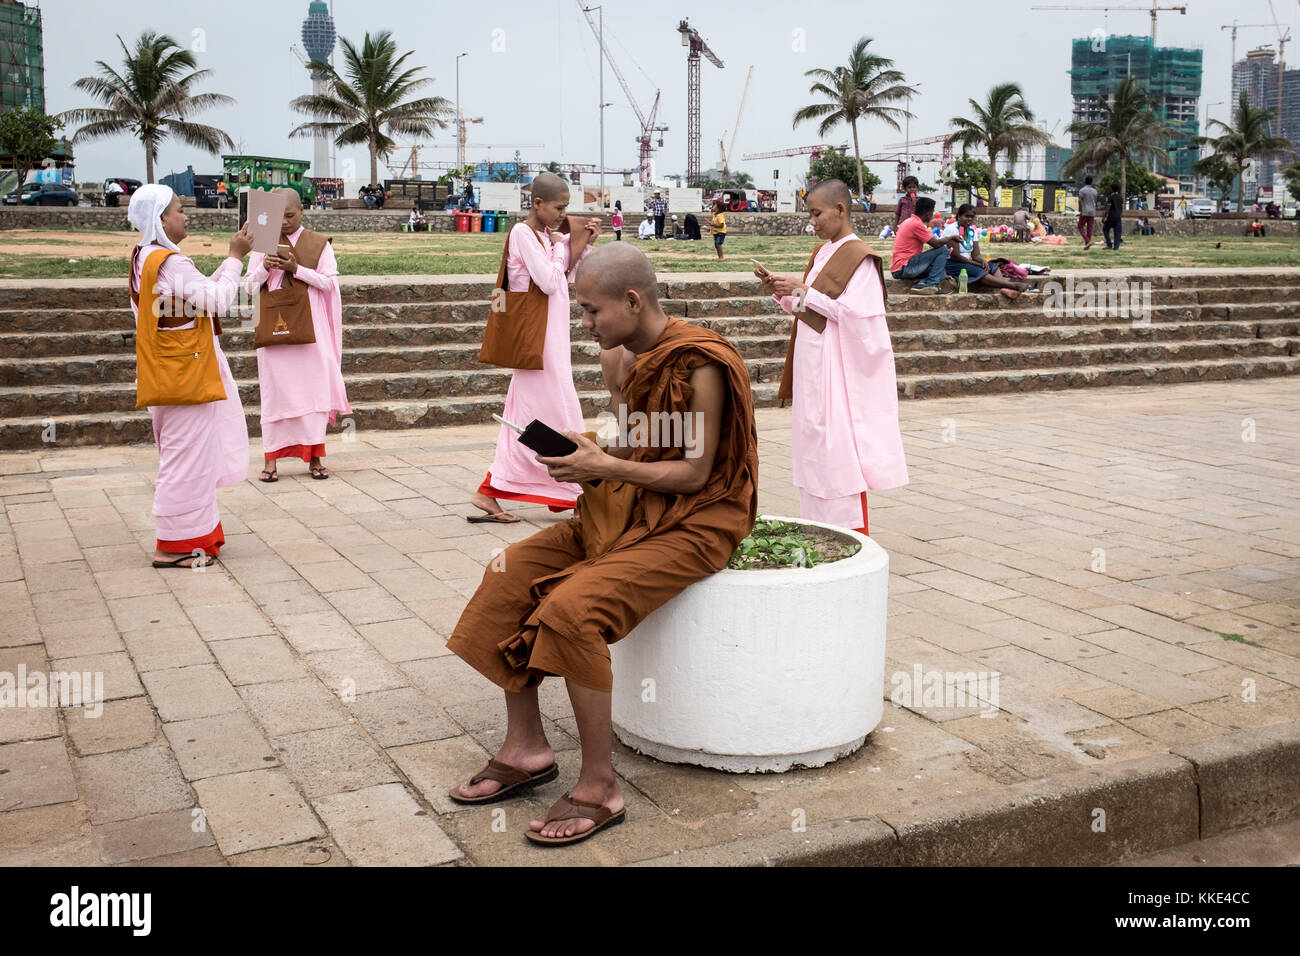 A group of monks and nuns from Myanmar look at their smartphones at Galle Face Green in Colombo, Sri Lanka. Stock Photo